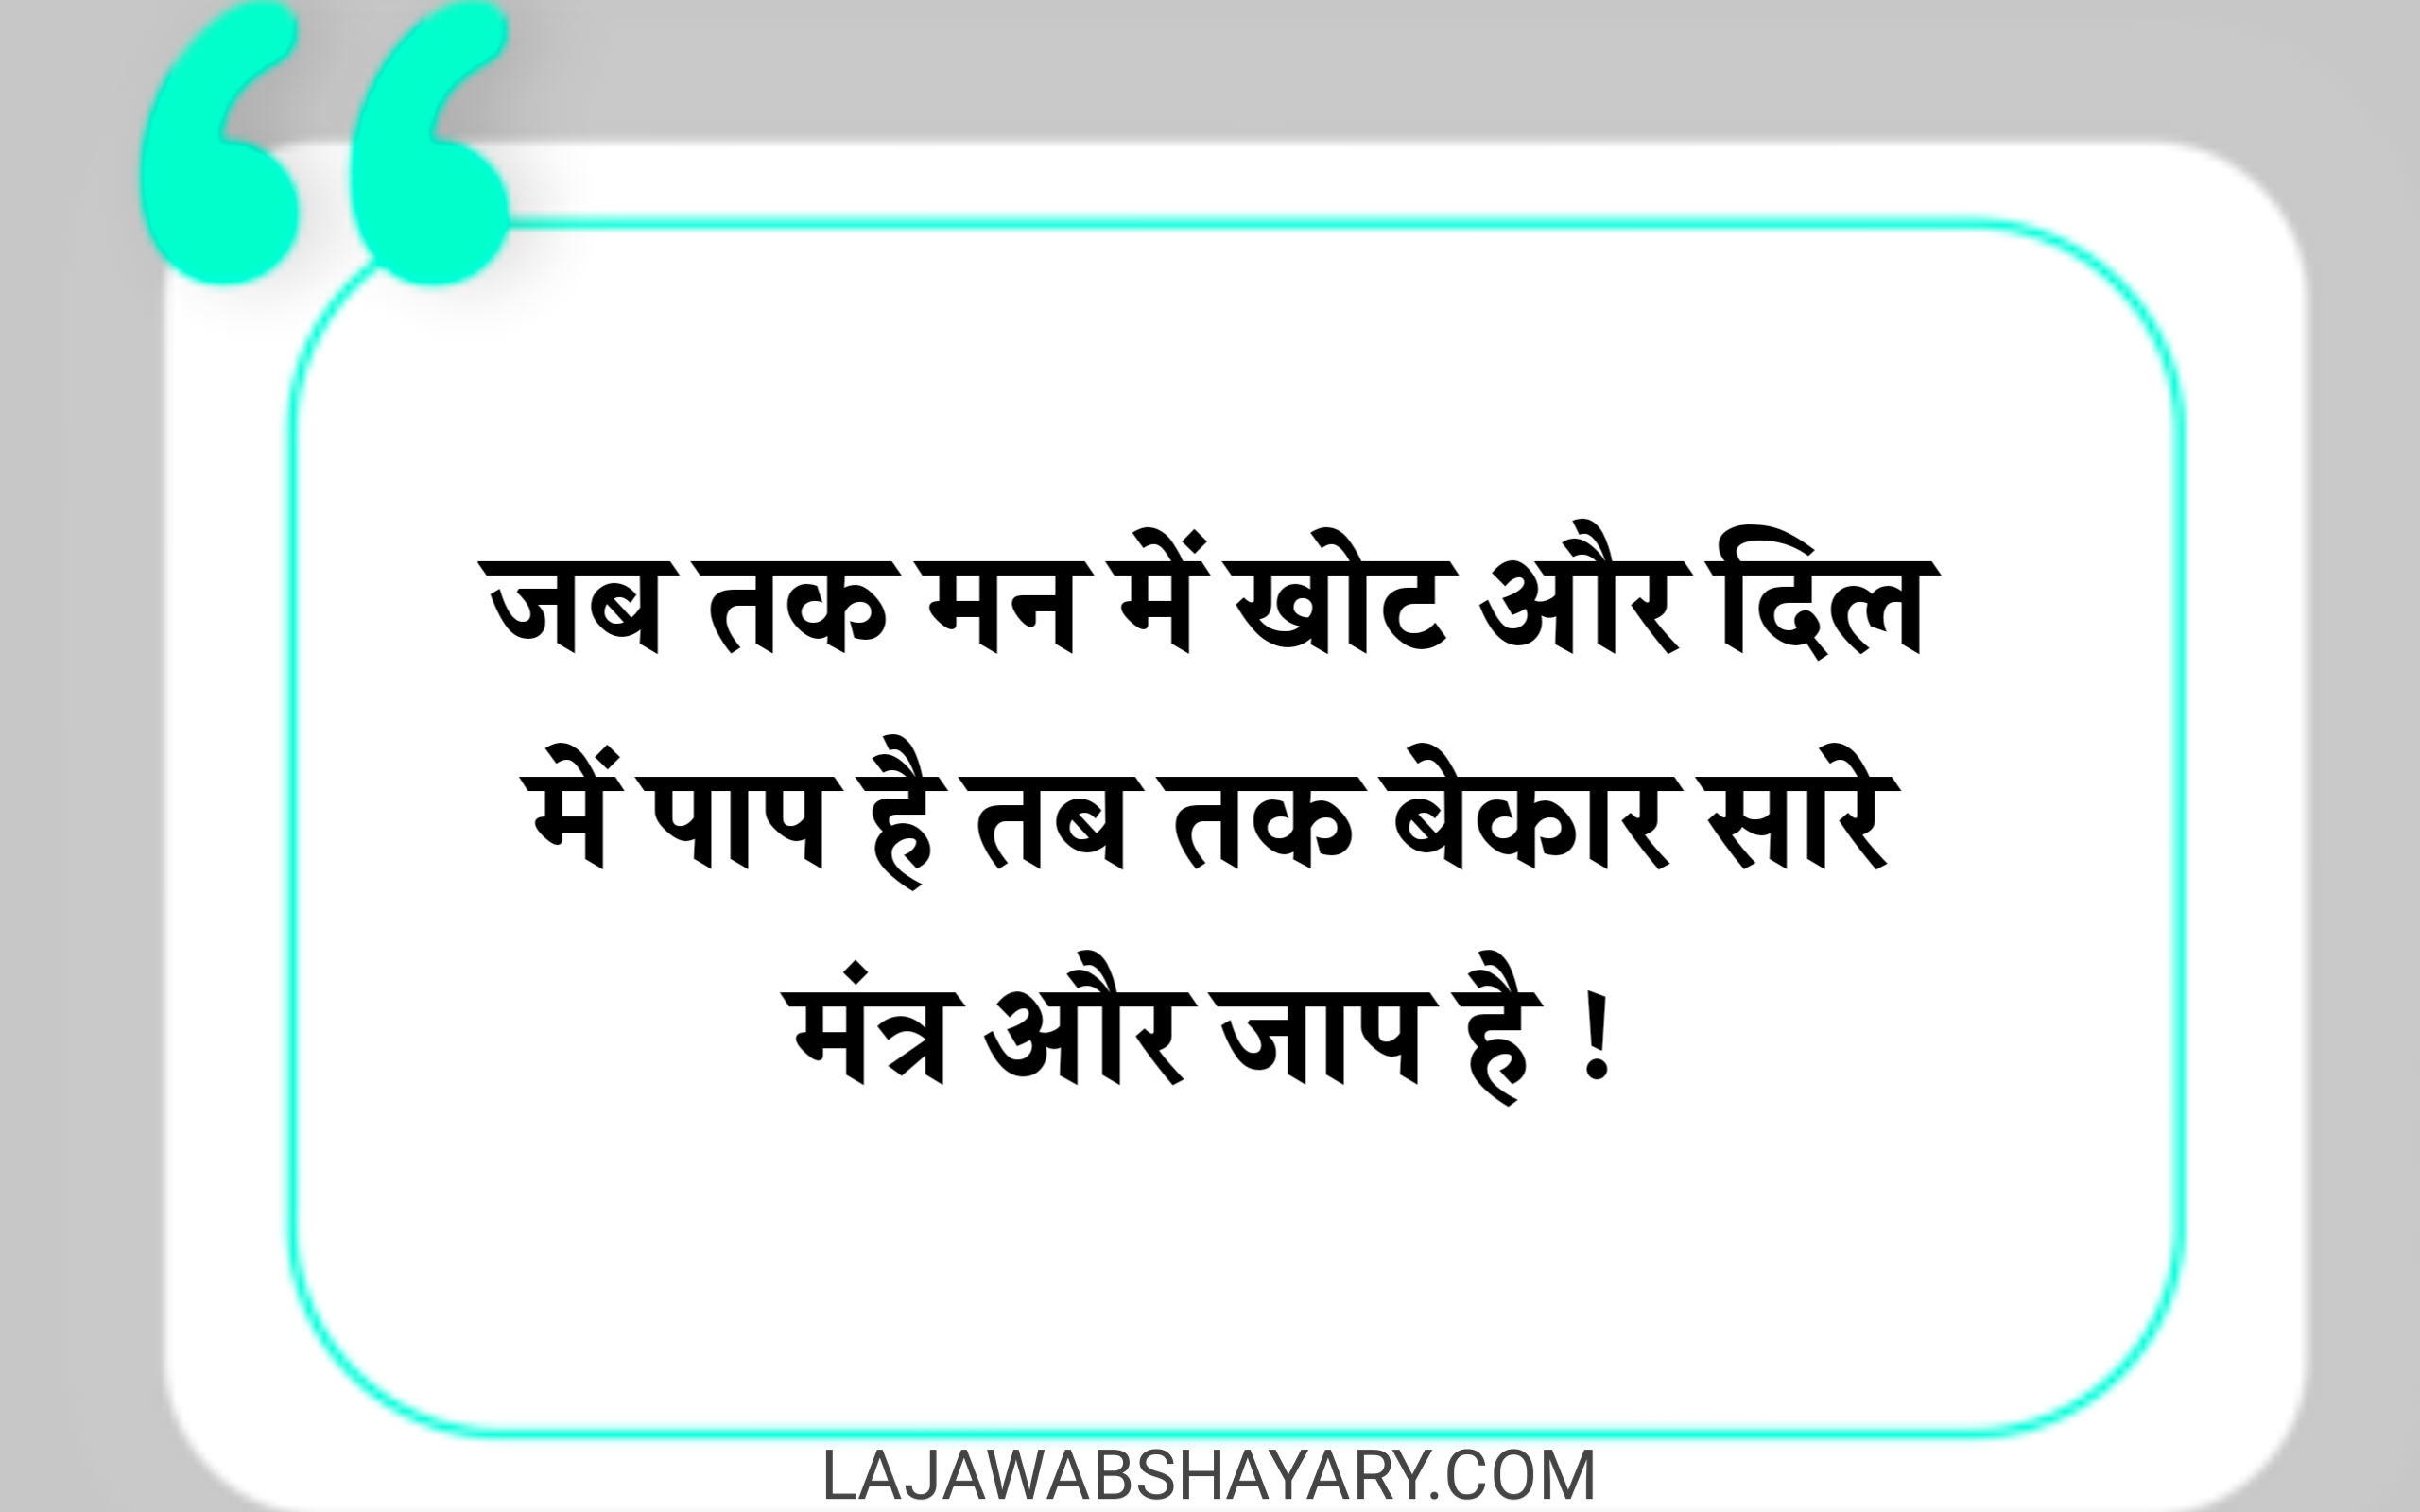 [100%New] 2 line quotes in Hindi | 2 लाइन कोट्स इन हिंदी,best 2 line quotes in hindi,2 line quotes in hindi attitude,2 line status in Hindi,2 line shayari in Hindi 